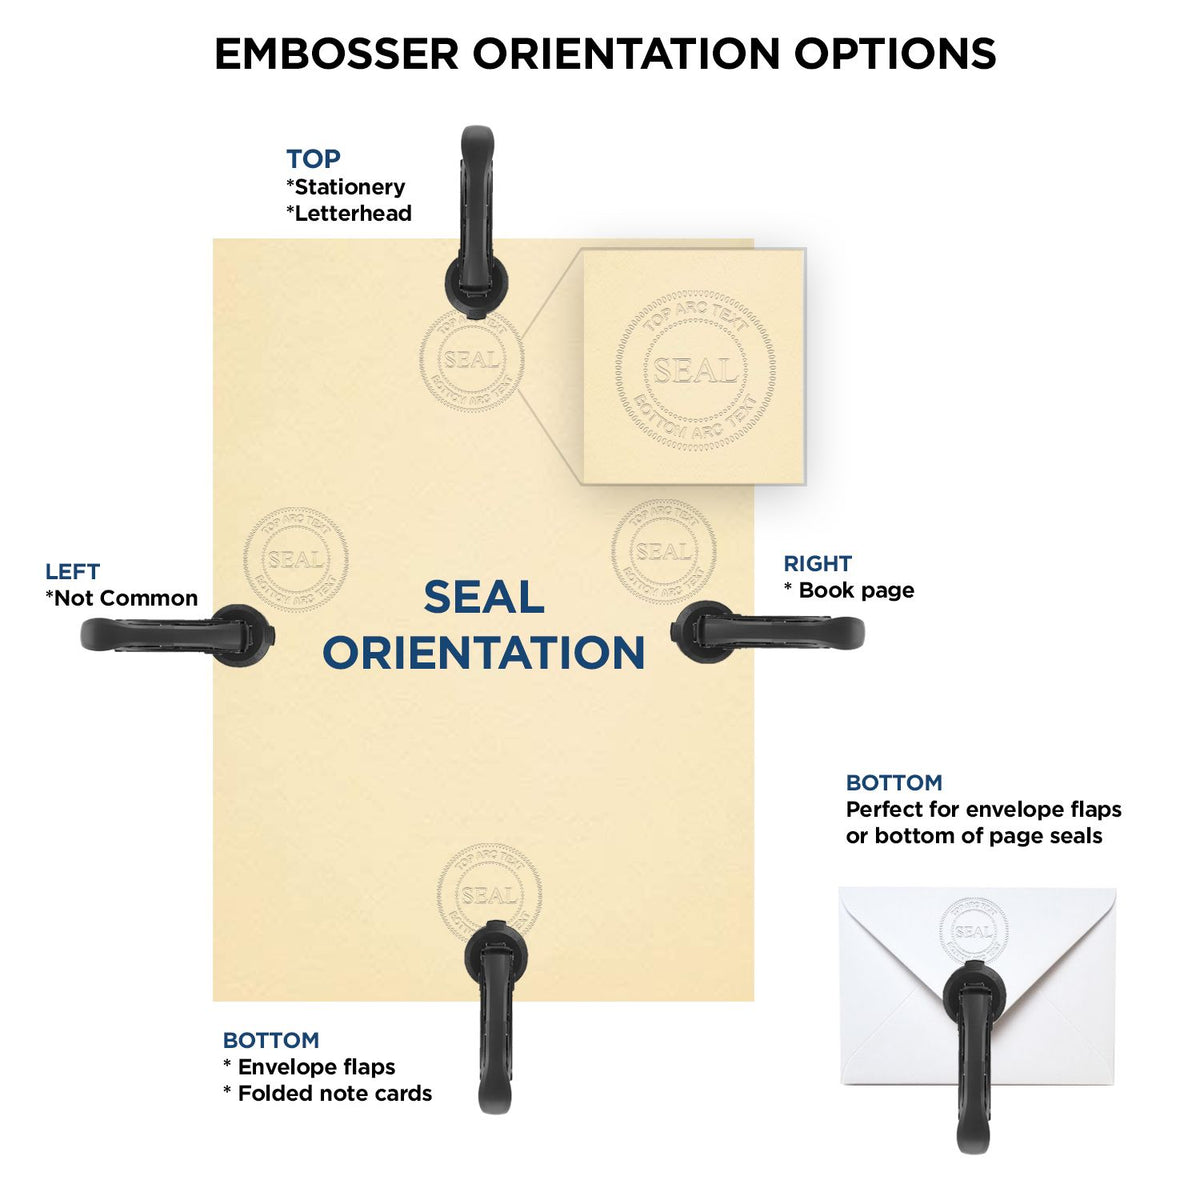 An infographic for the Handheld Florida Professional Geologist Embosser showing embosser orientation, this is showing examples of a top, bottom, right and left insert.